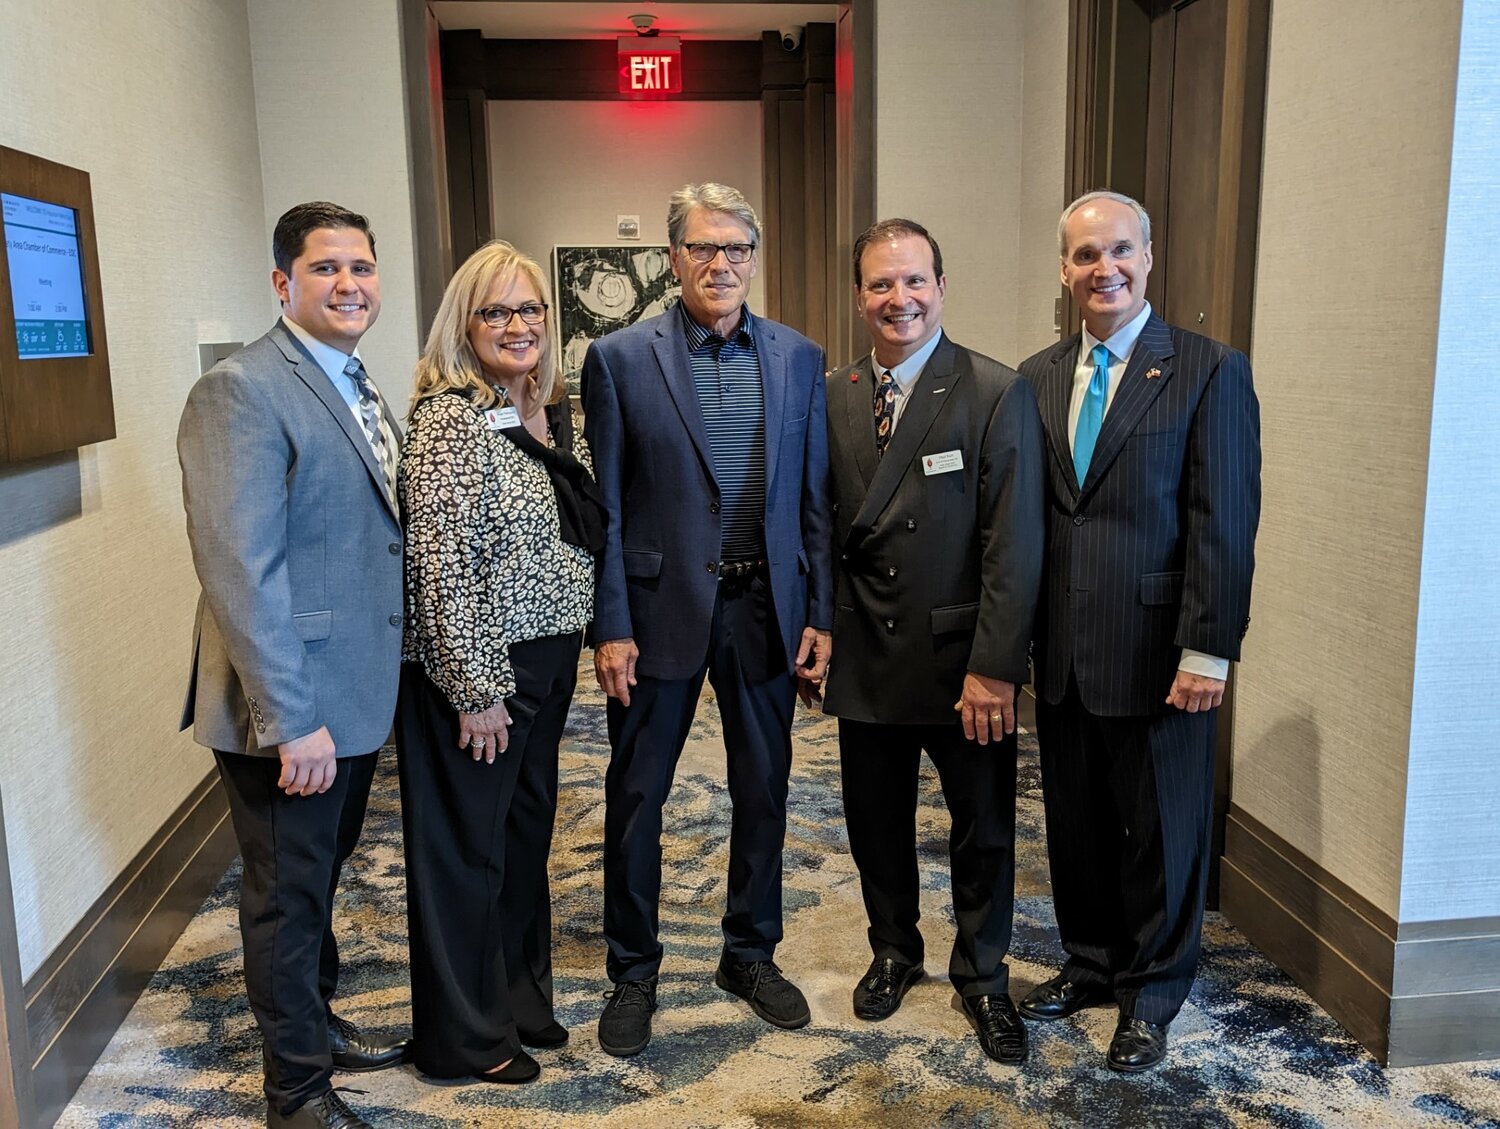 From left, Matthew Ferraro, Katy Area Chamber of Commerce president; Angie Thomason, Katy Area Economic Development Council president/CEO; former Gov. Rick Perry; Paul Kurt, Katy Area Economic Development Council chairman, and state Rep. Mike Schofield, R-Katy, at the first annual Katy Area Economic Outlook Summit.